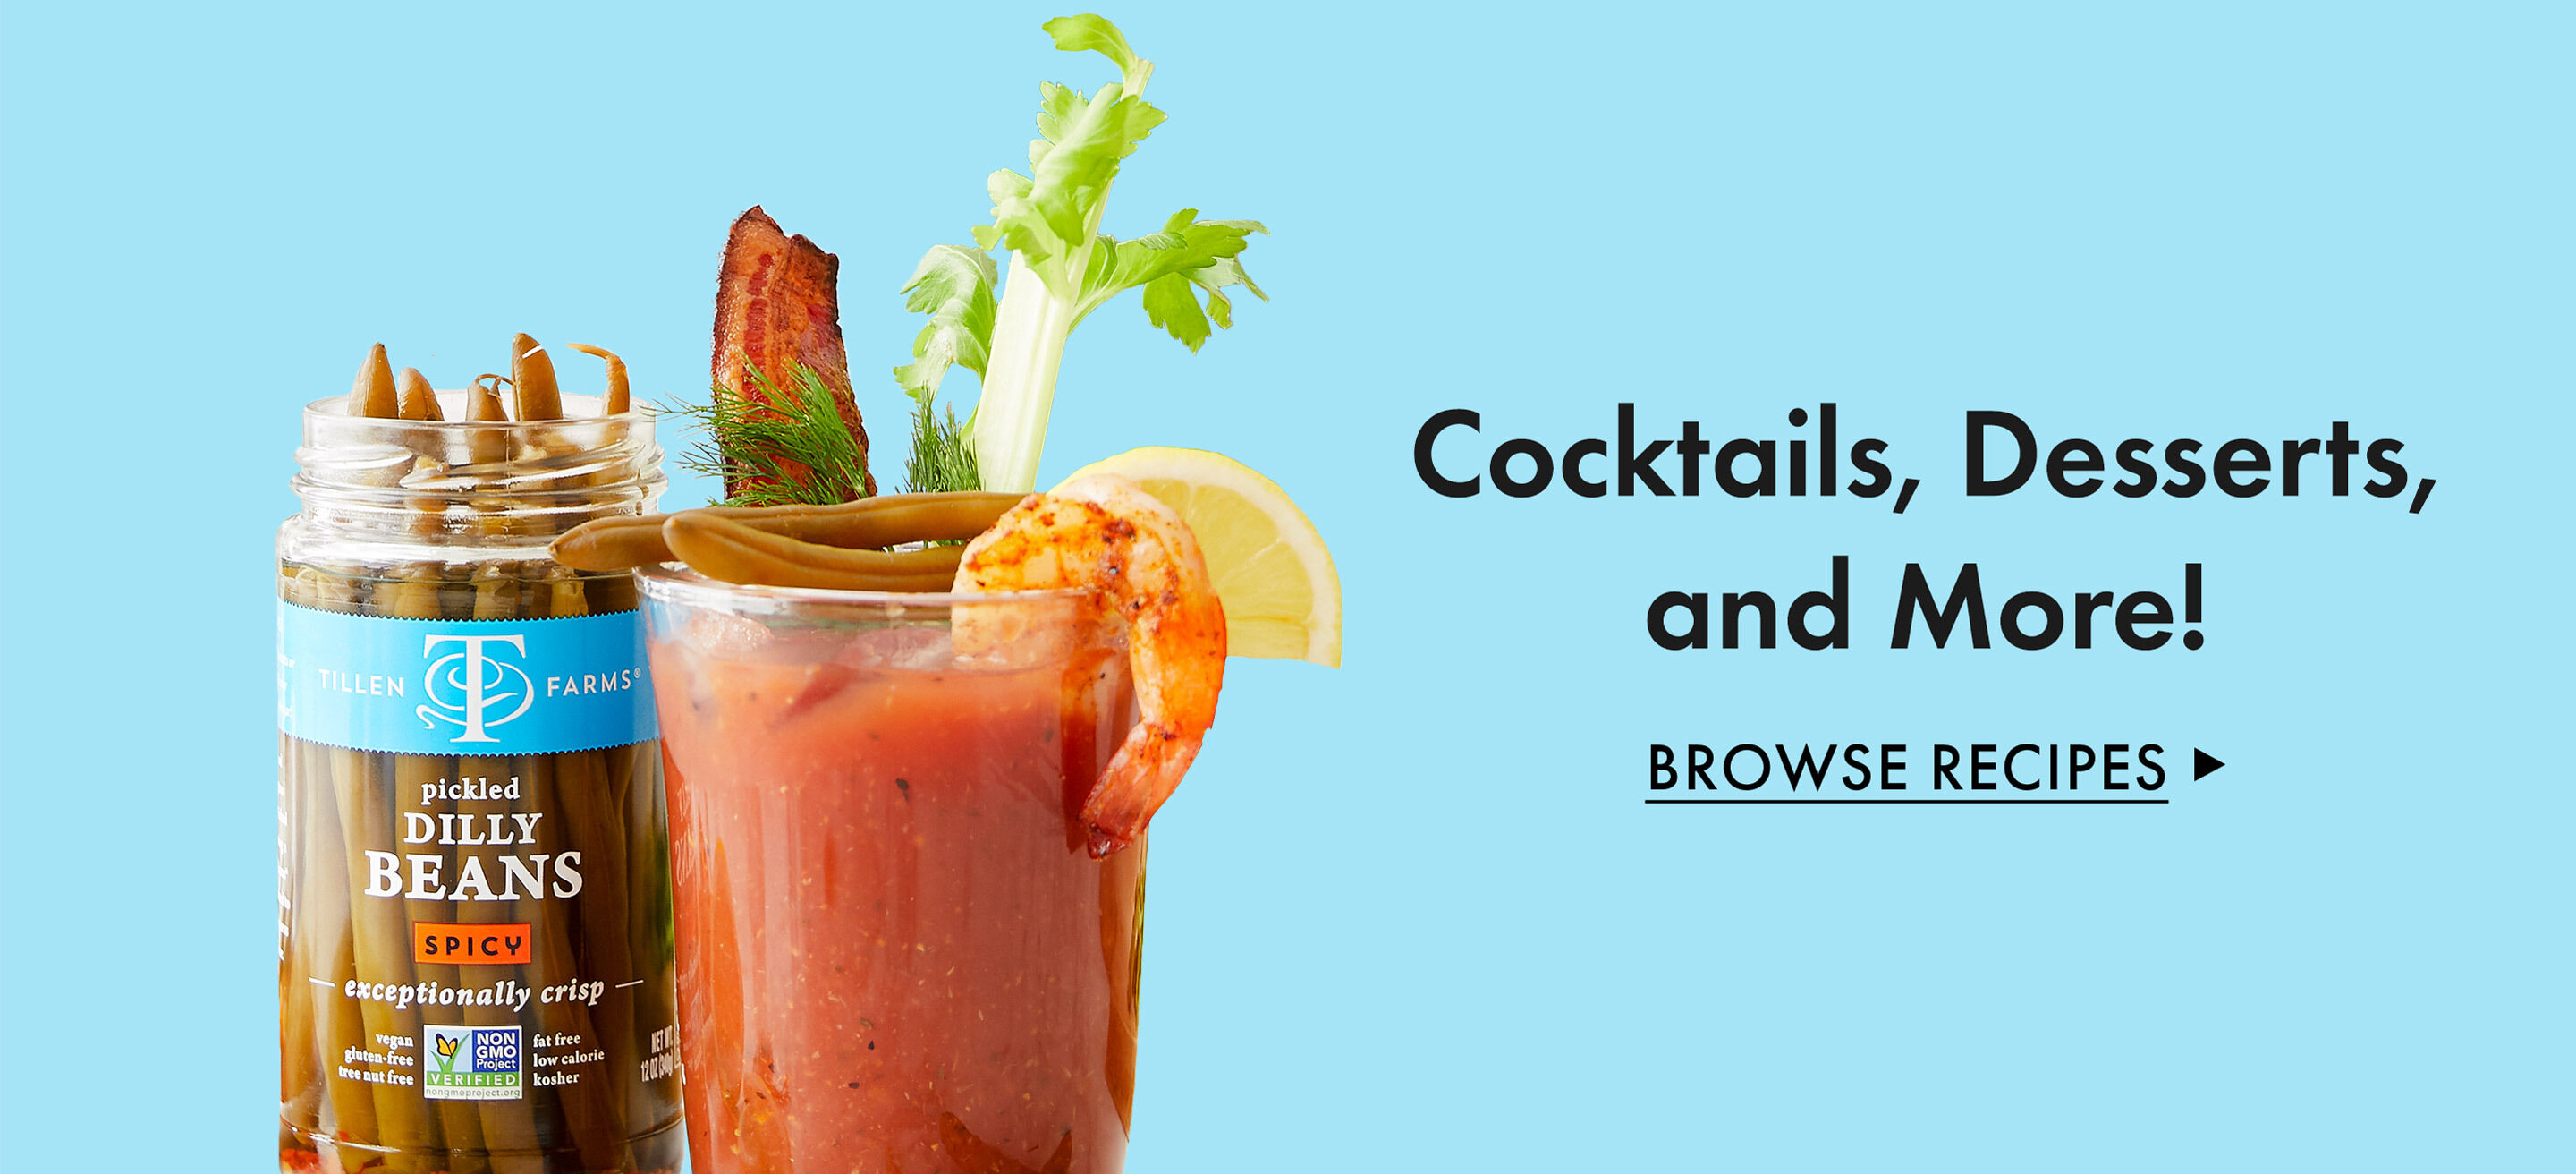 Cocktails, Desserts and More! Browse Recipes